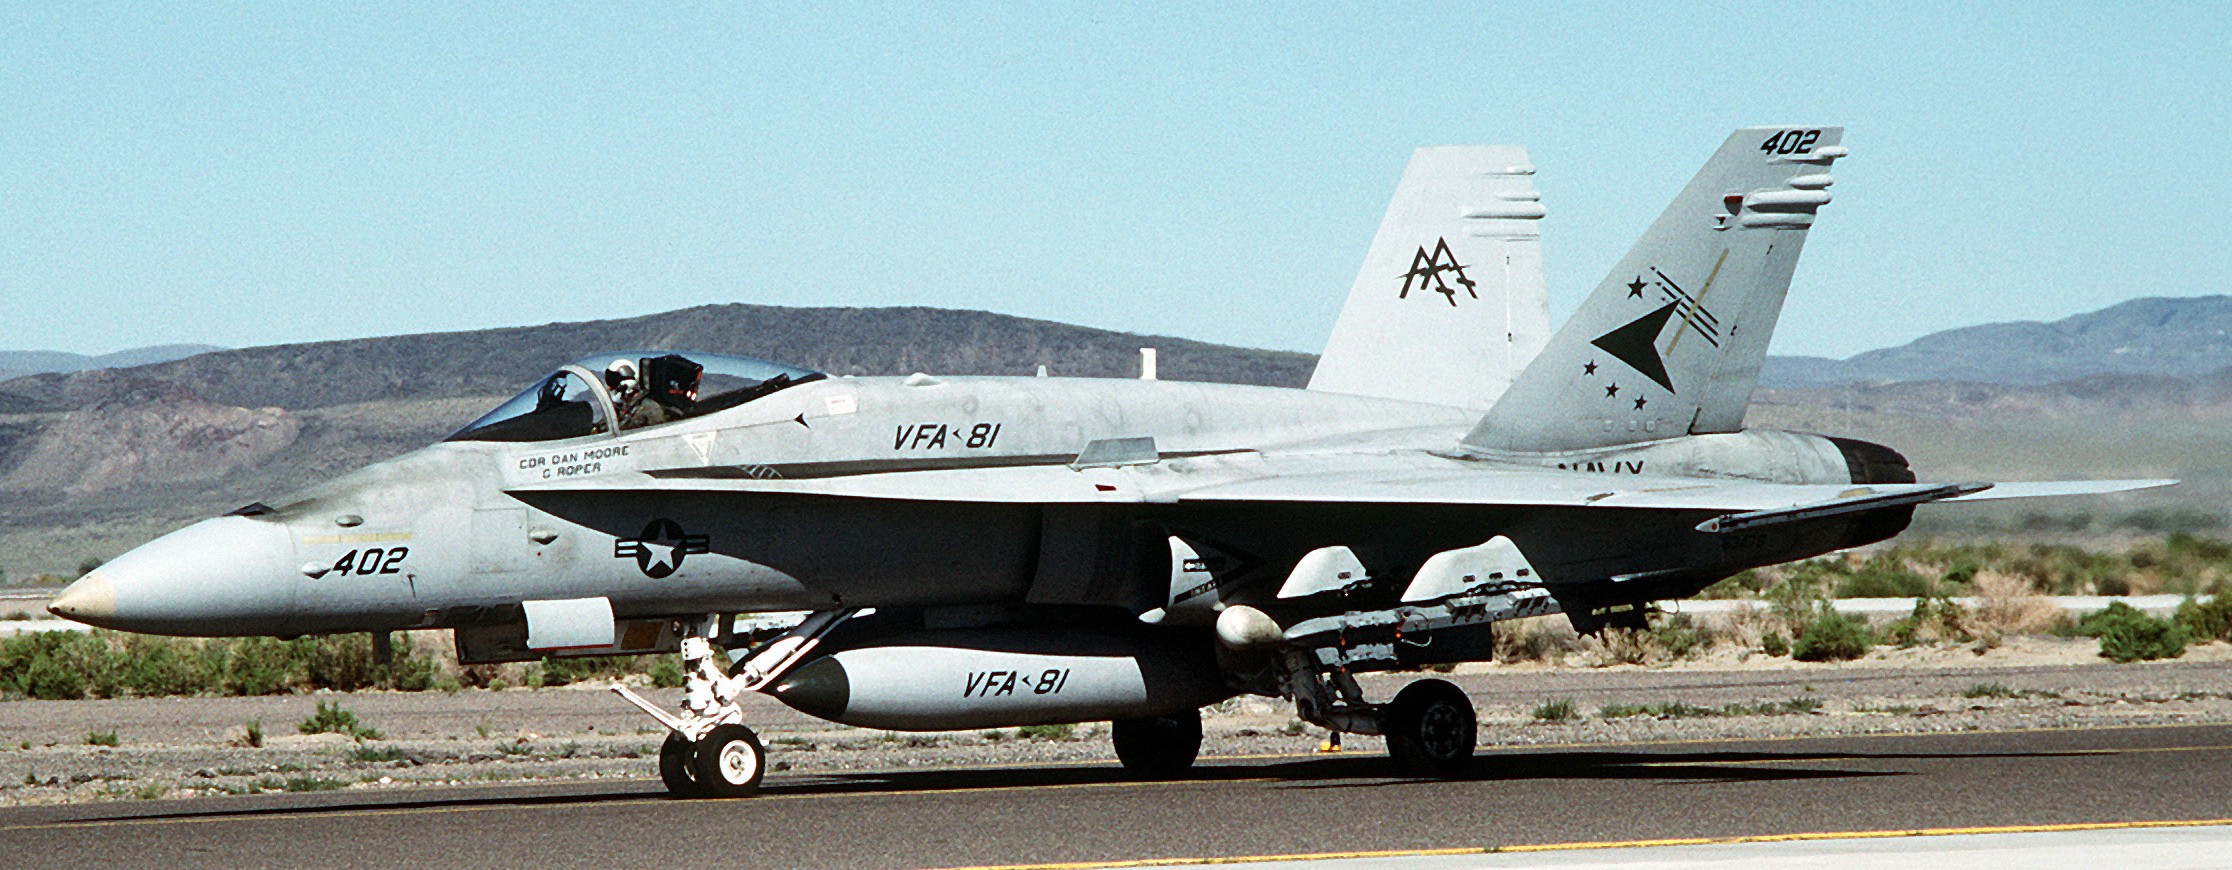 vfa-81 sunliners strike fighter squadron f/a-18c hornet cvw-17 100p nas fallon nevada